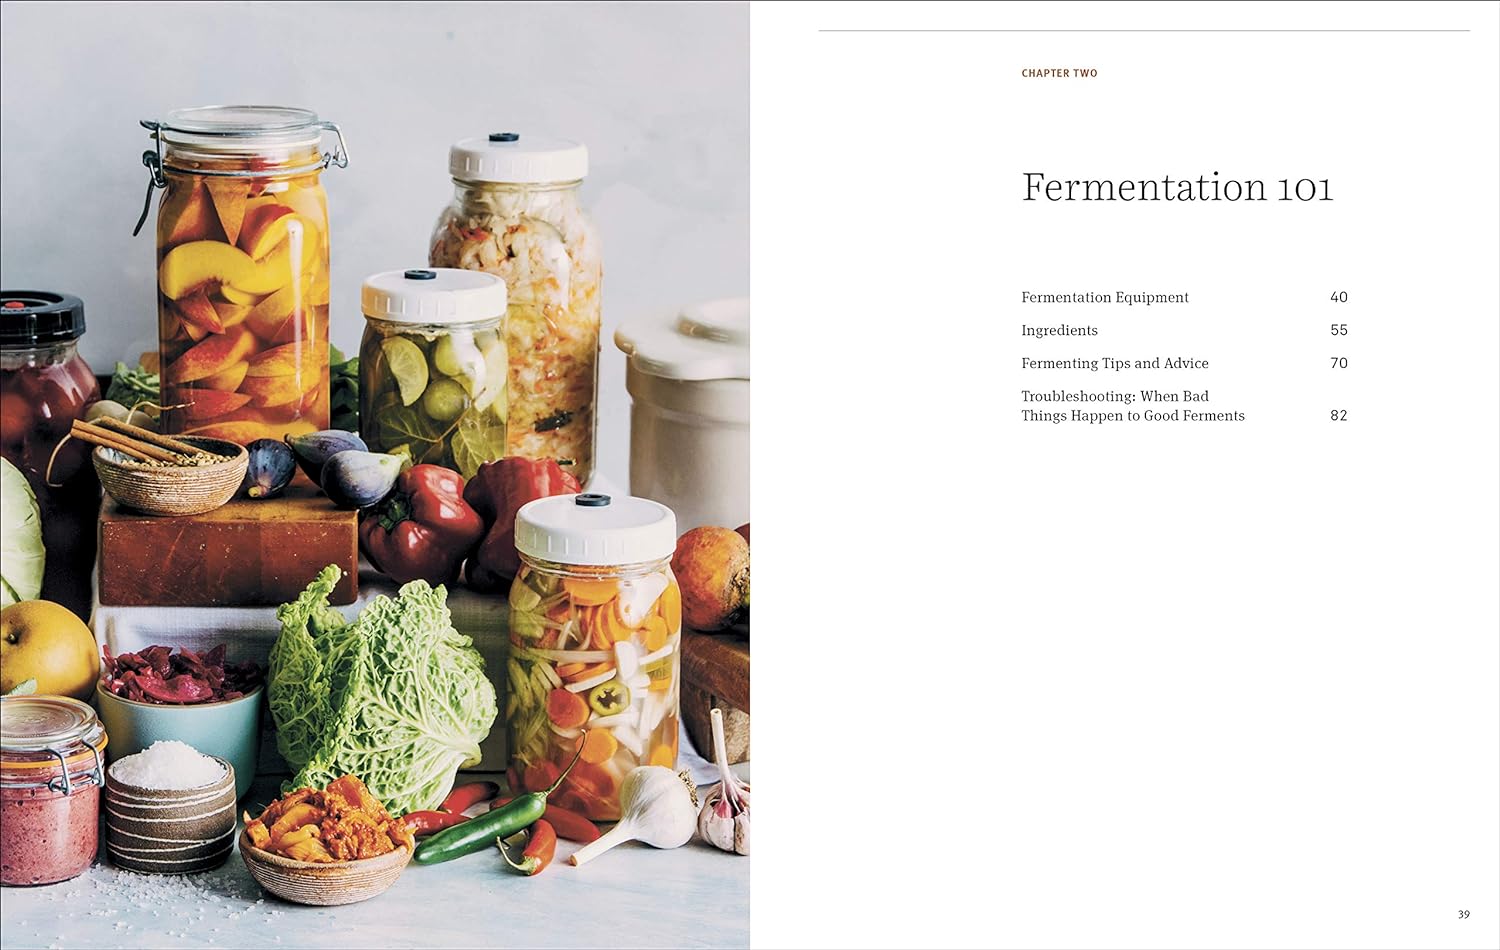 Farmhouse Culture Guide to Fermenting - by Kathryn Lukas and Shane Peterson